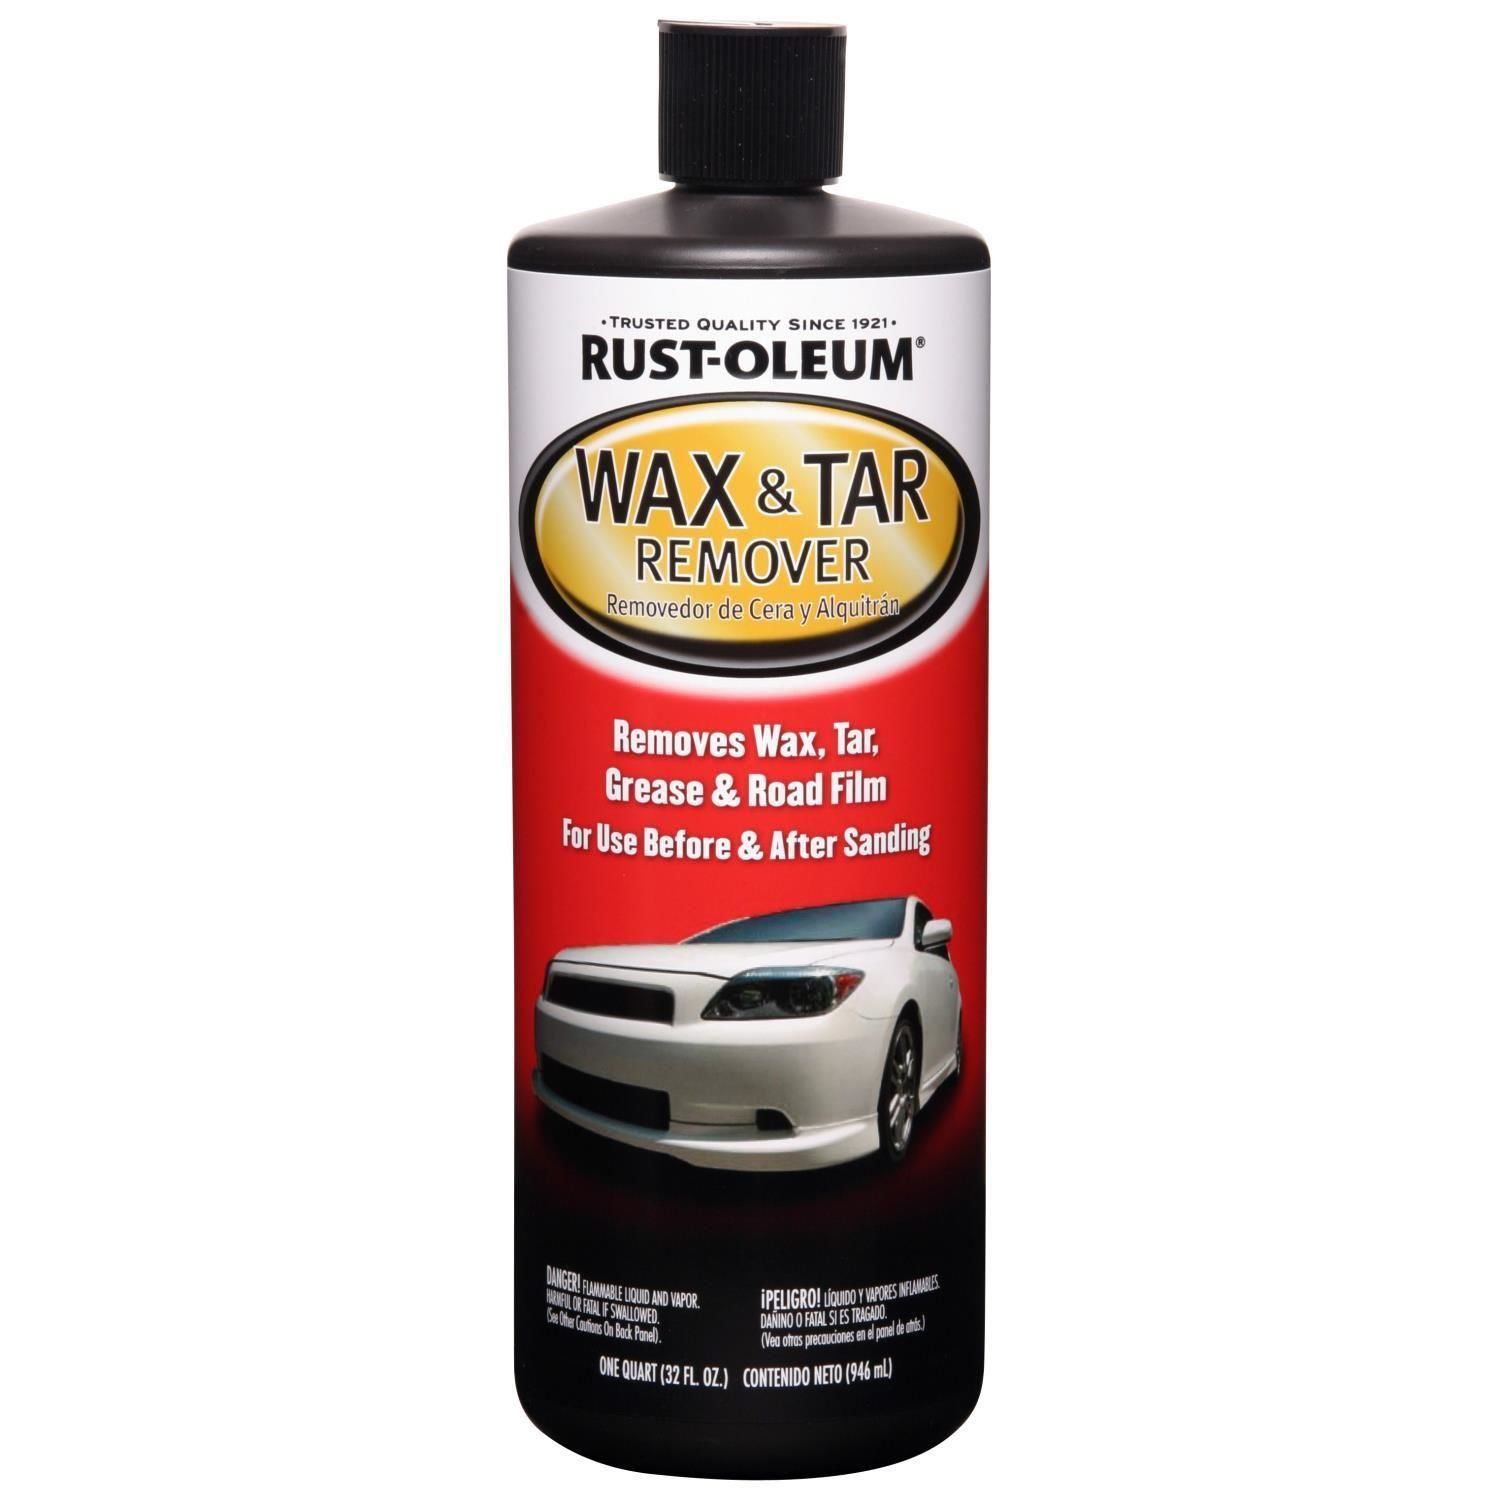 Malco Super-Citra Clean™ Tar, Wax and Grease Remover